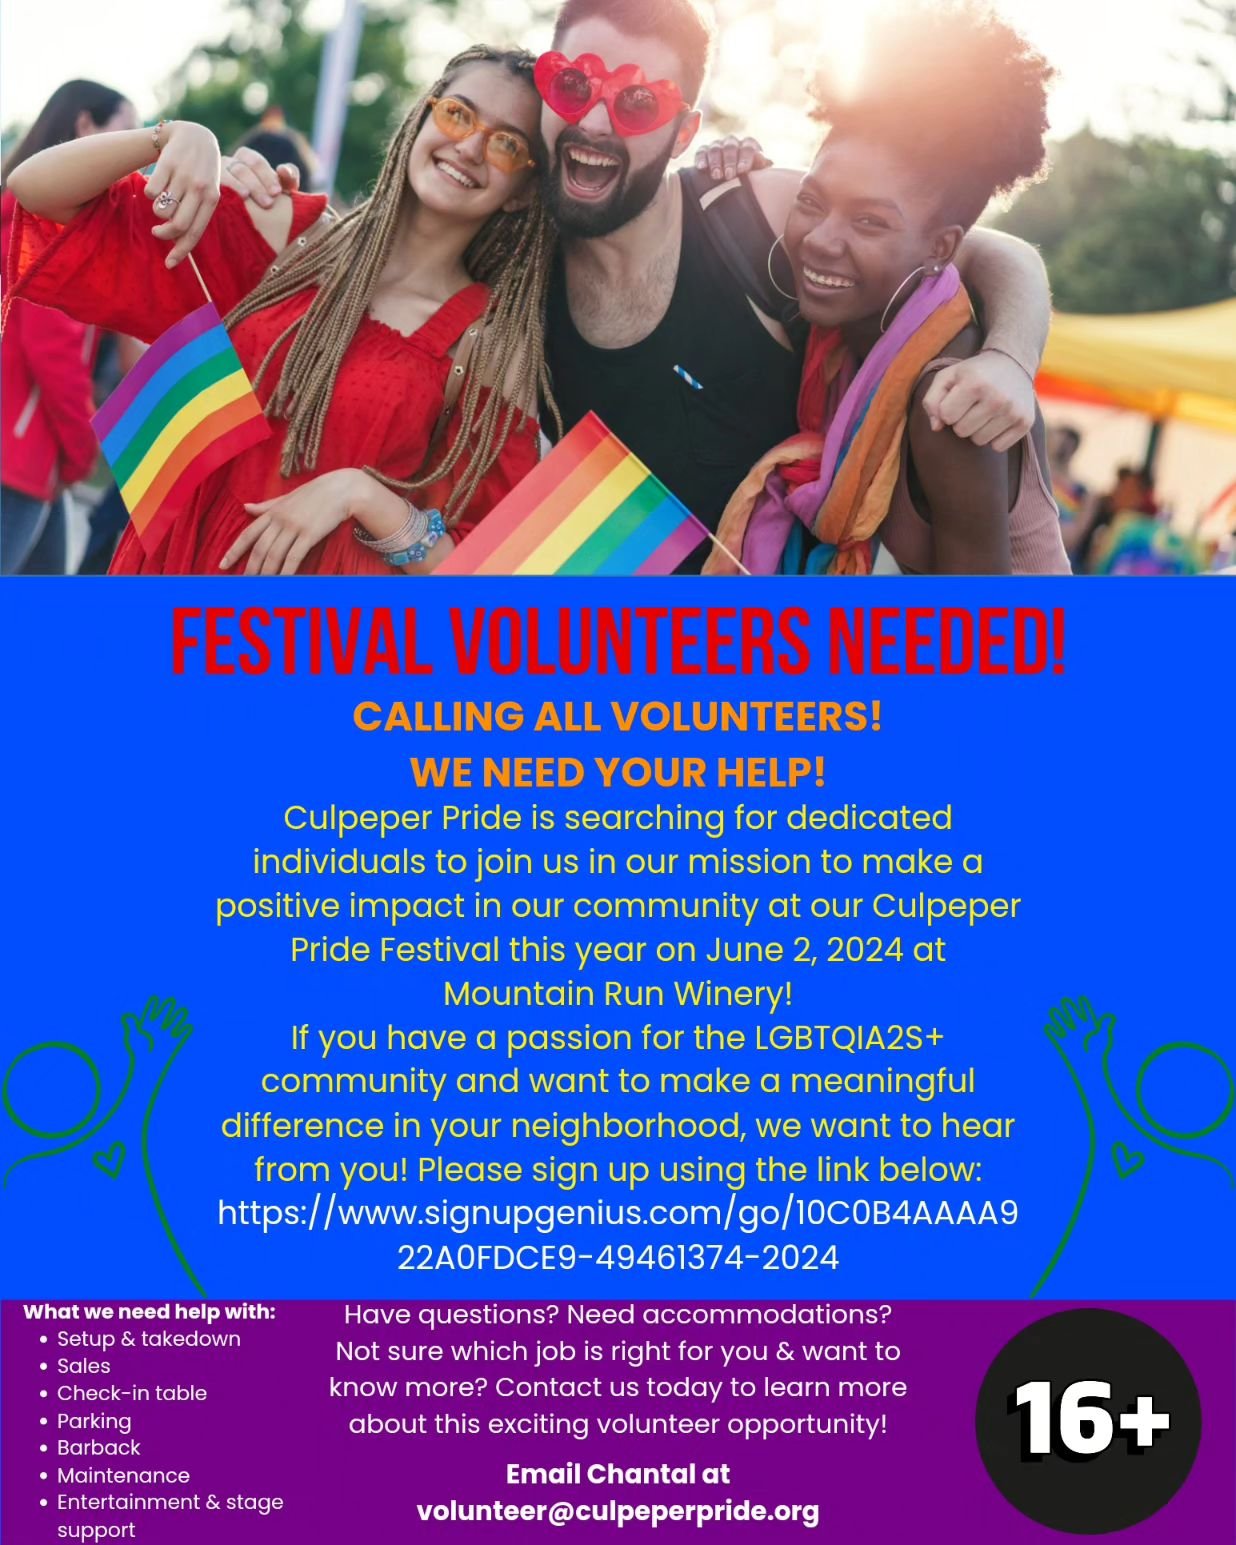 We still need volunteers for the 2024 Culpeper Pride Festival!

Sign up here:

https://www.signupgenius.com/go/10C0B4AAAA922A0FDCE9-49461374-2024